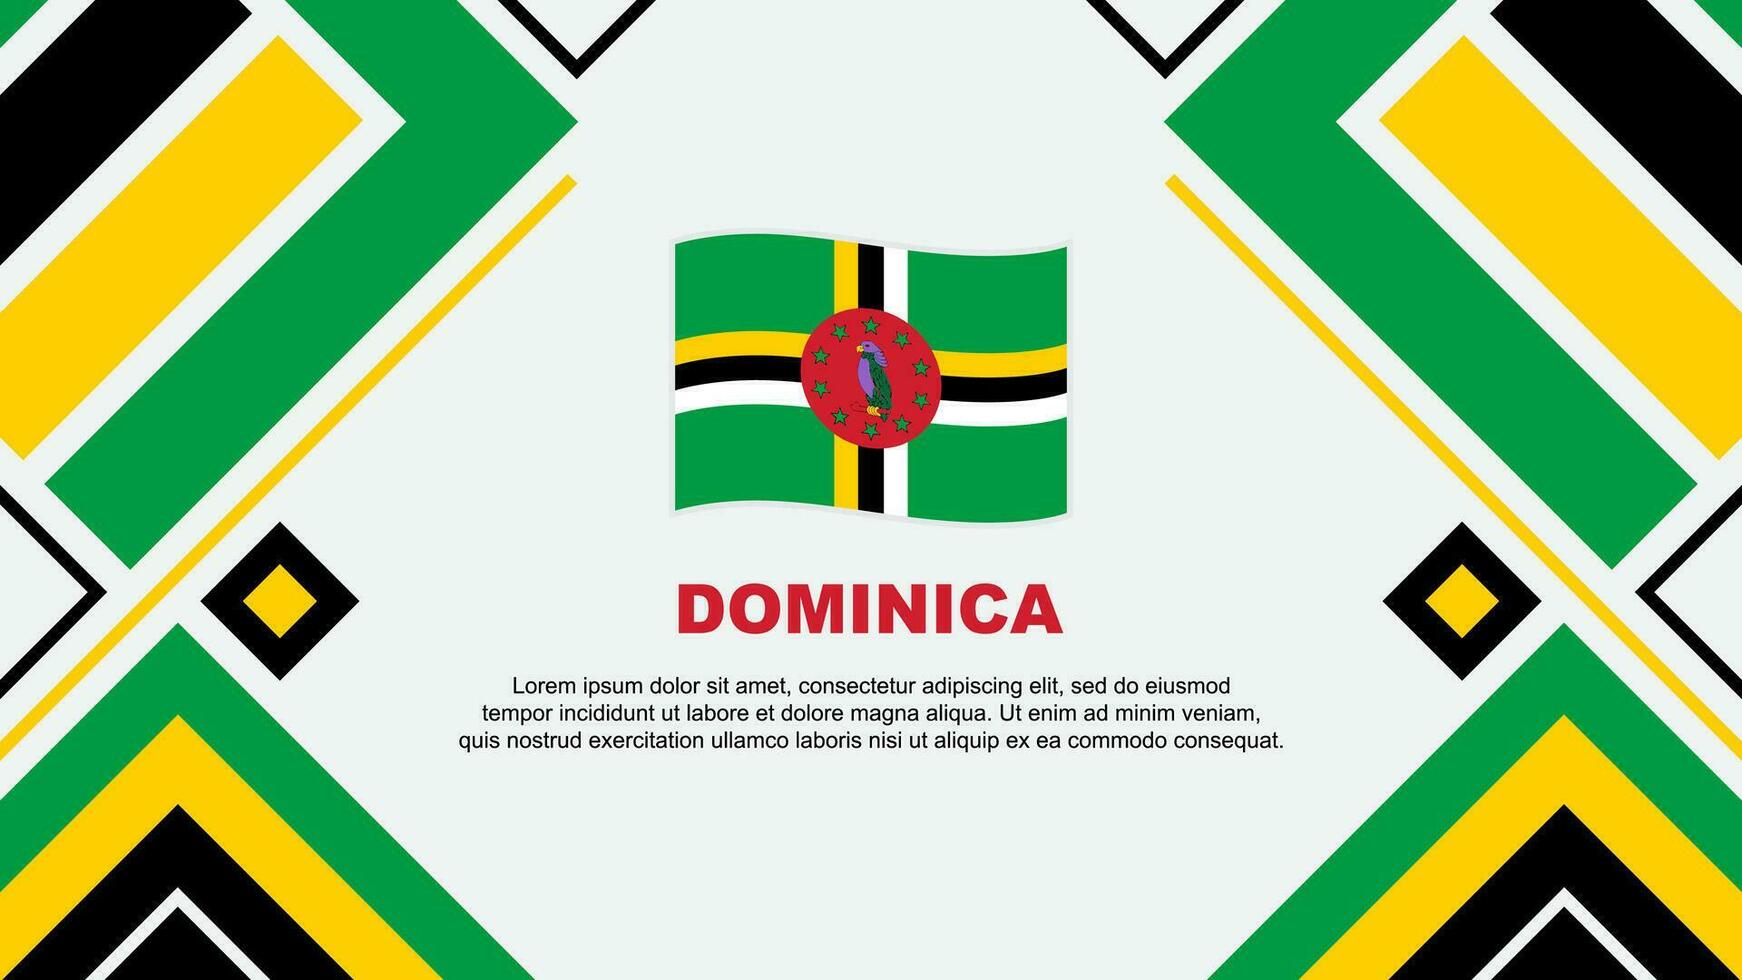 Dominica Flag Abstract Background Design Template. Dominica Independence Day Banner Wallpaper Vector Illustration. Dominica Flag